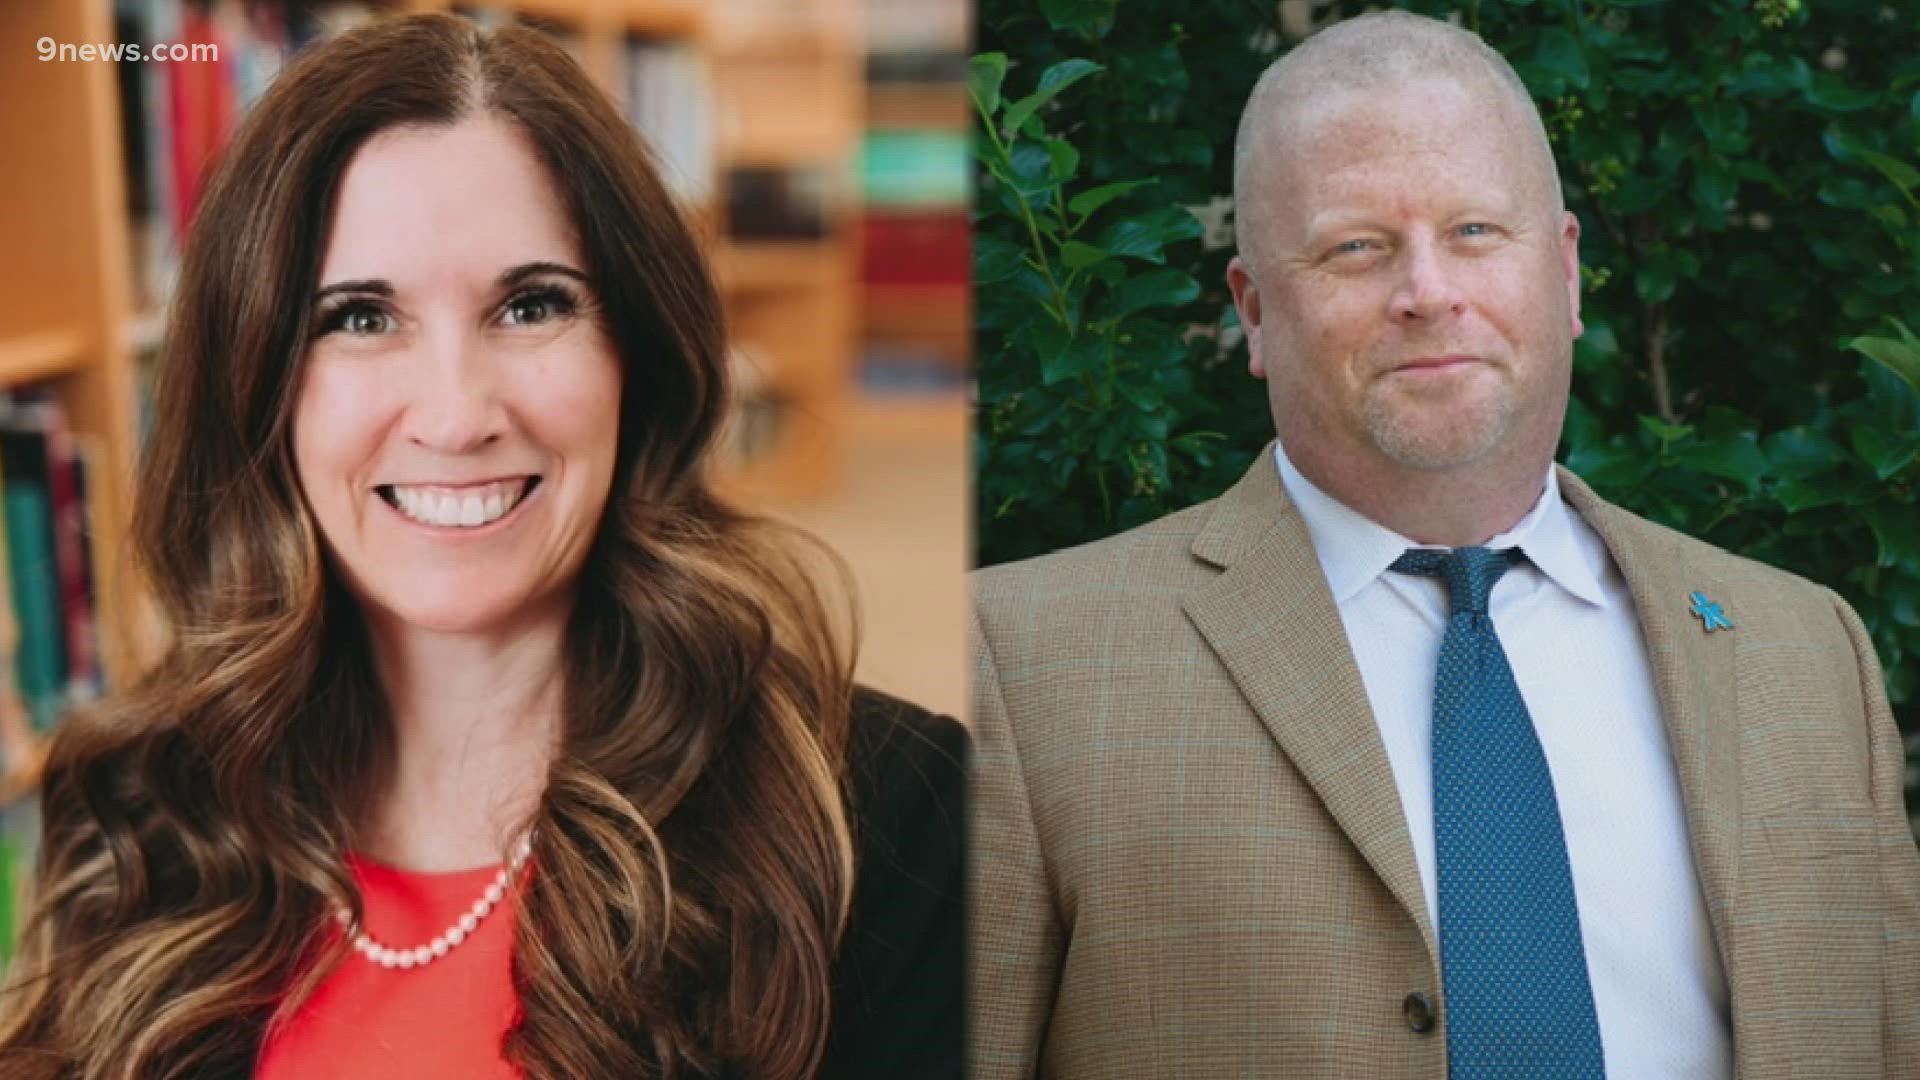 The Douglas County Board of Education has named Erin Kane and Danny Winsor as the two finalists for its open superintendent position.